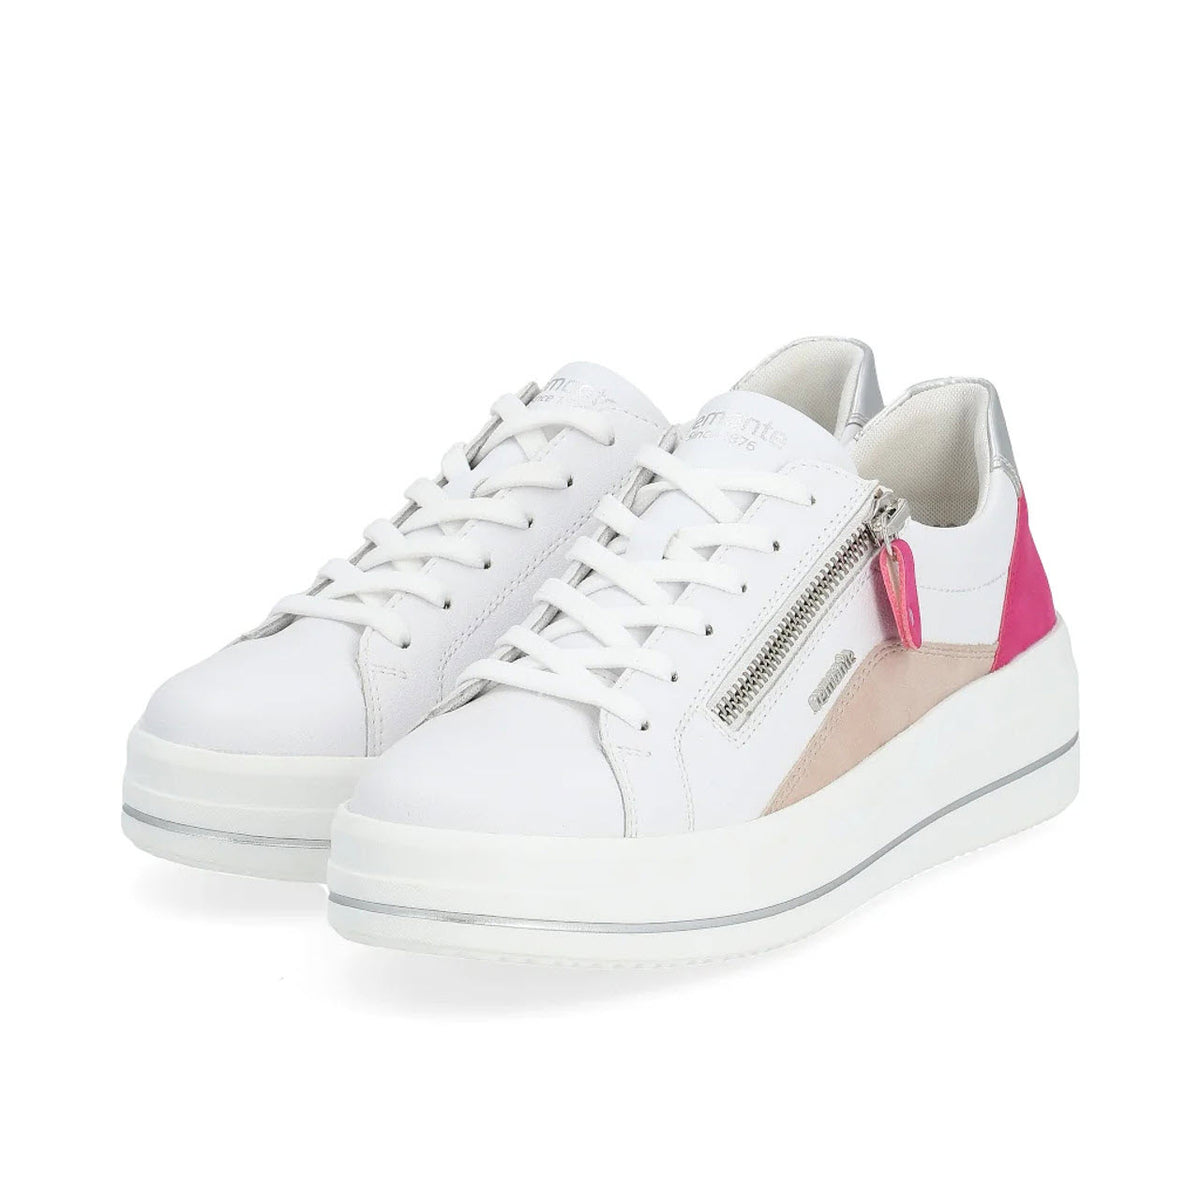 The Remonte REMONTE EURO COURT SNEAKER FUCHSIA MULTI - WOMENS features durable coated leather, a slight platform, a zipper detail on the side, a beige suede accent, and a pink heel panel.